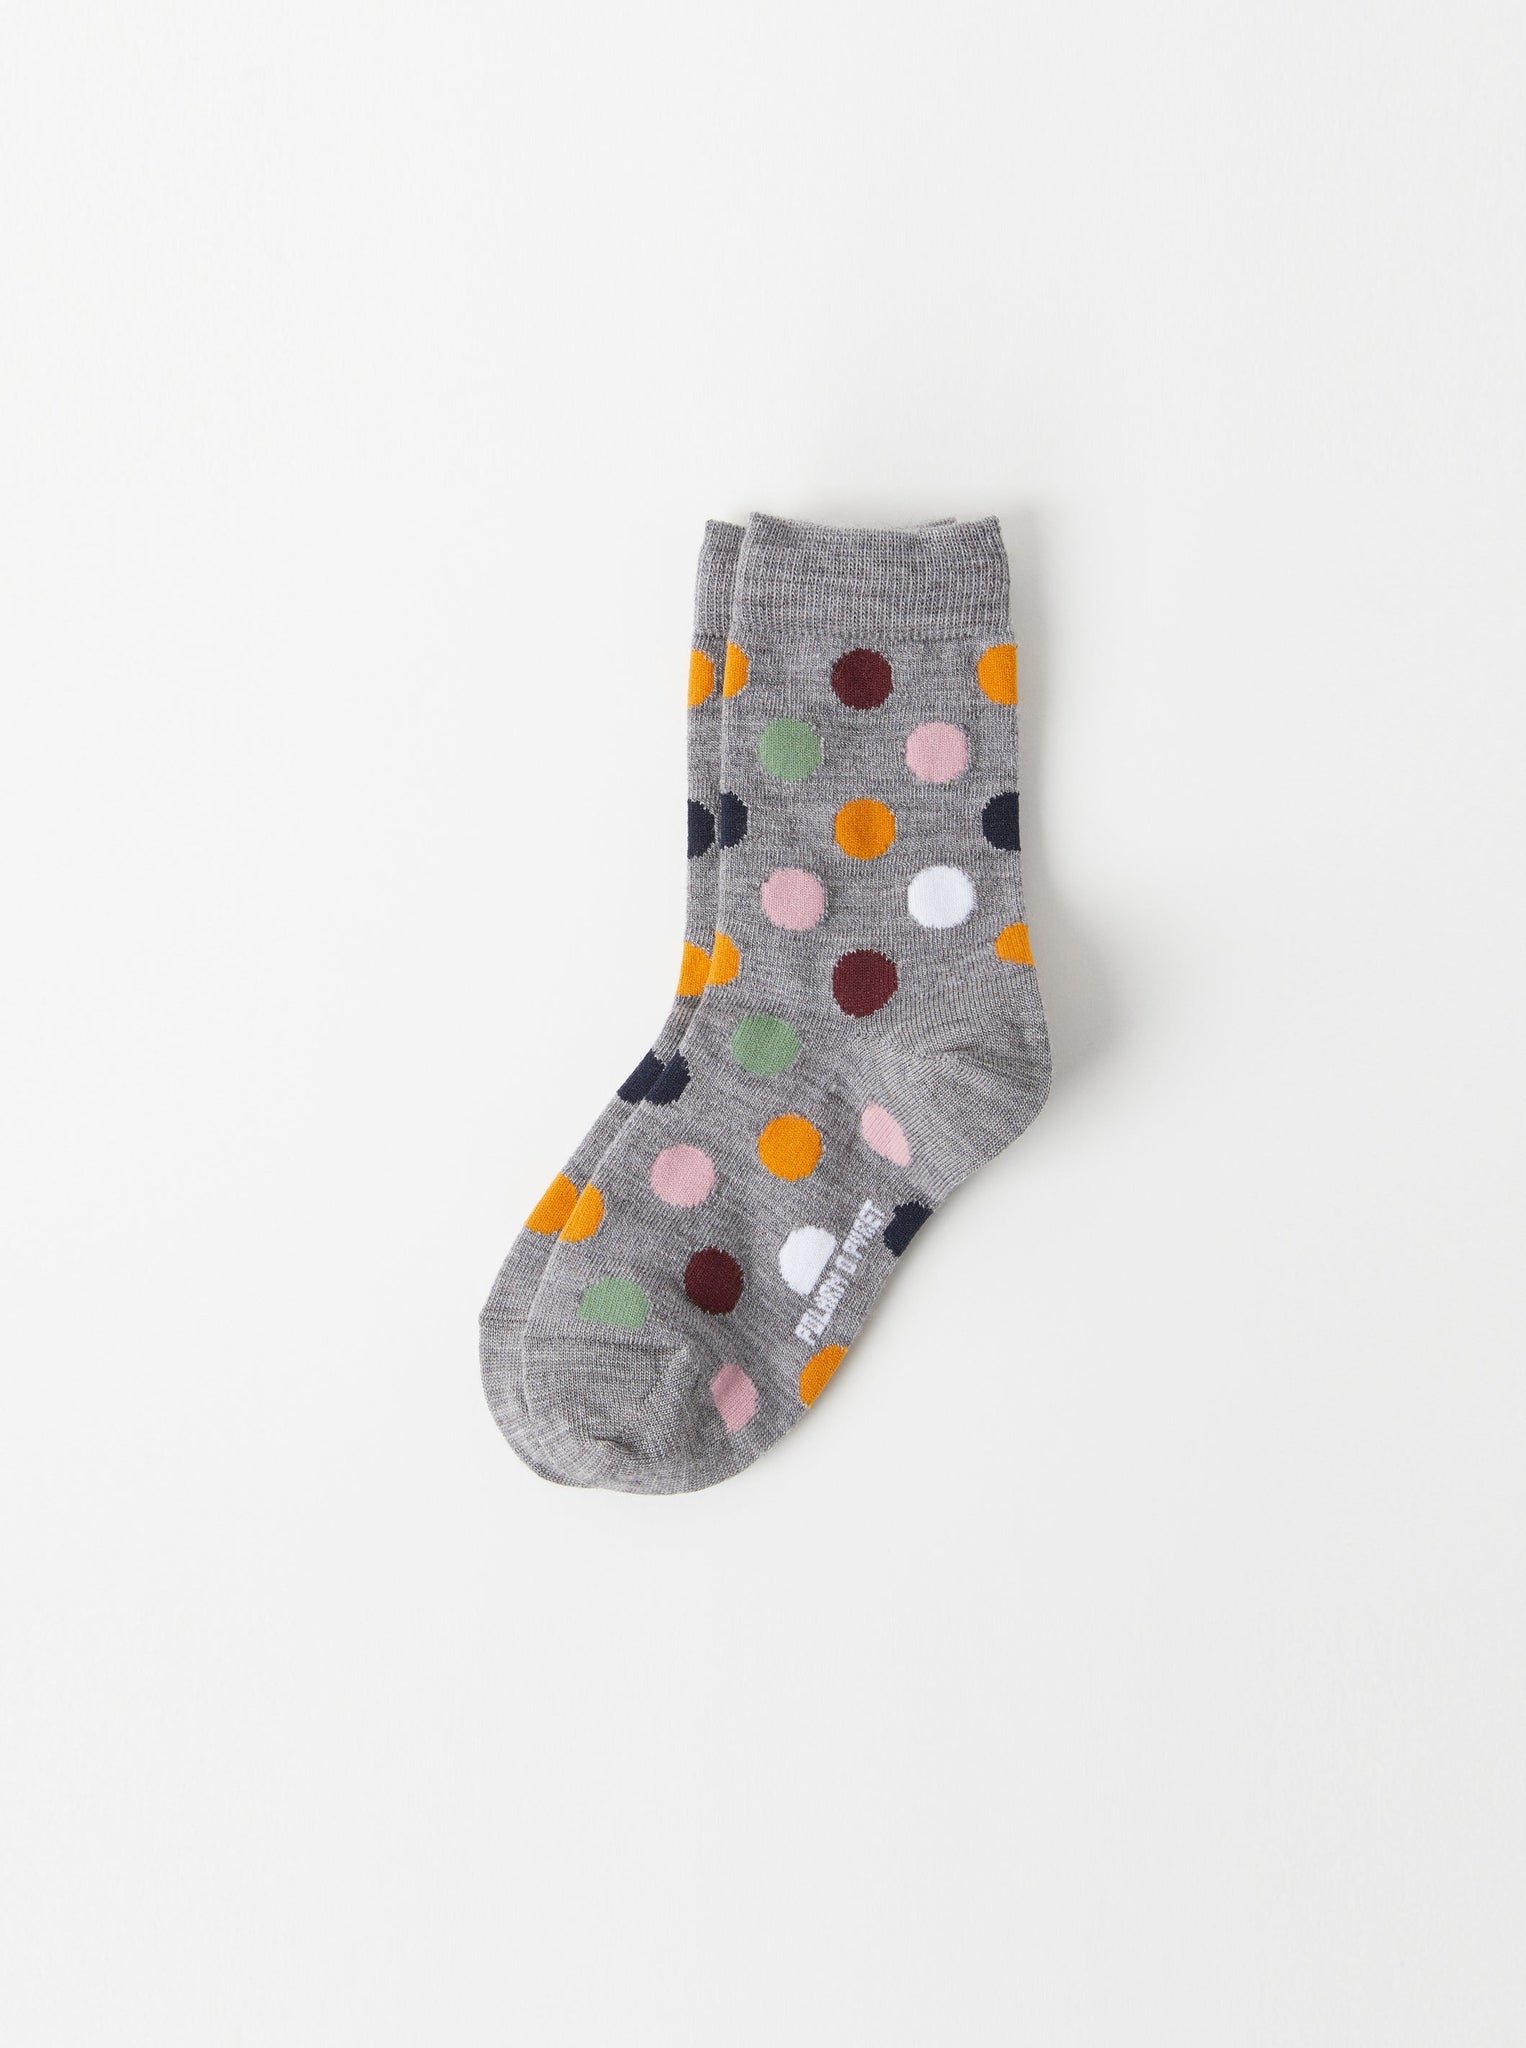 Grey Polka-Dot Merino Kids Socks from the Polarn O. Pyret kidswear collection. Made using ethically sourced materials.